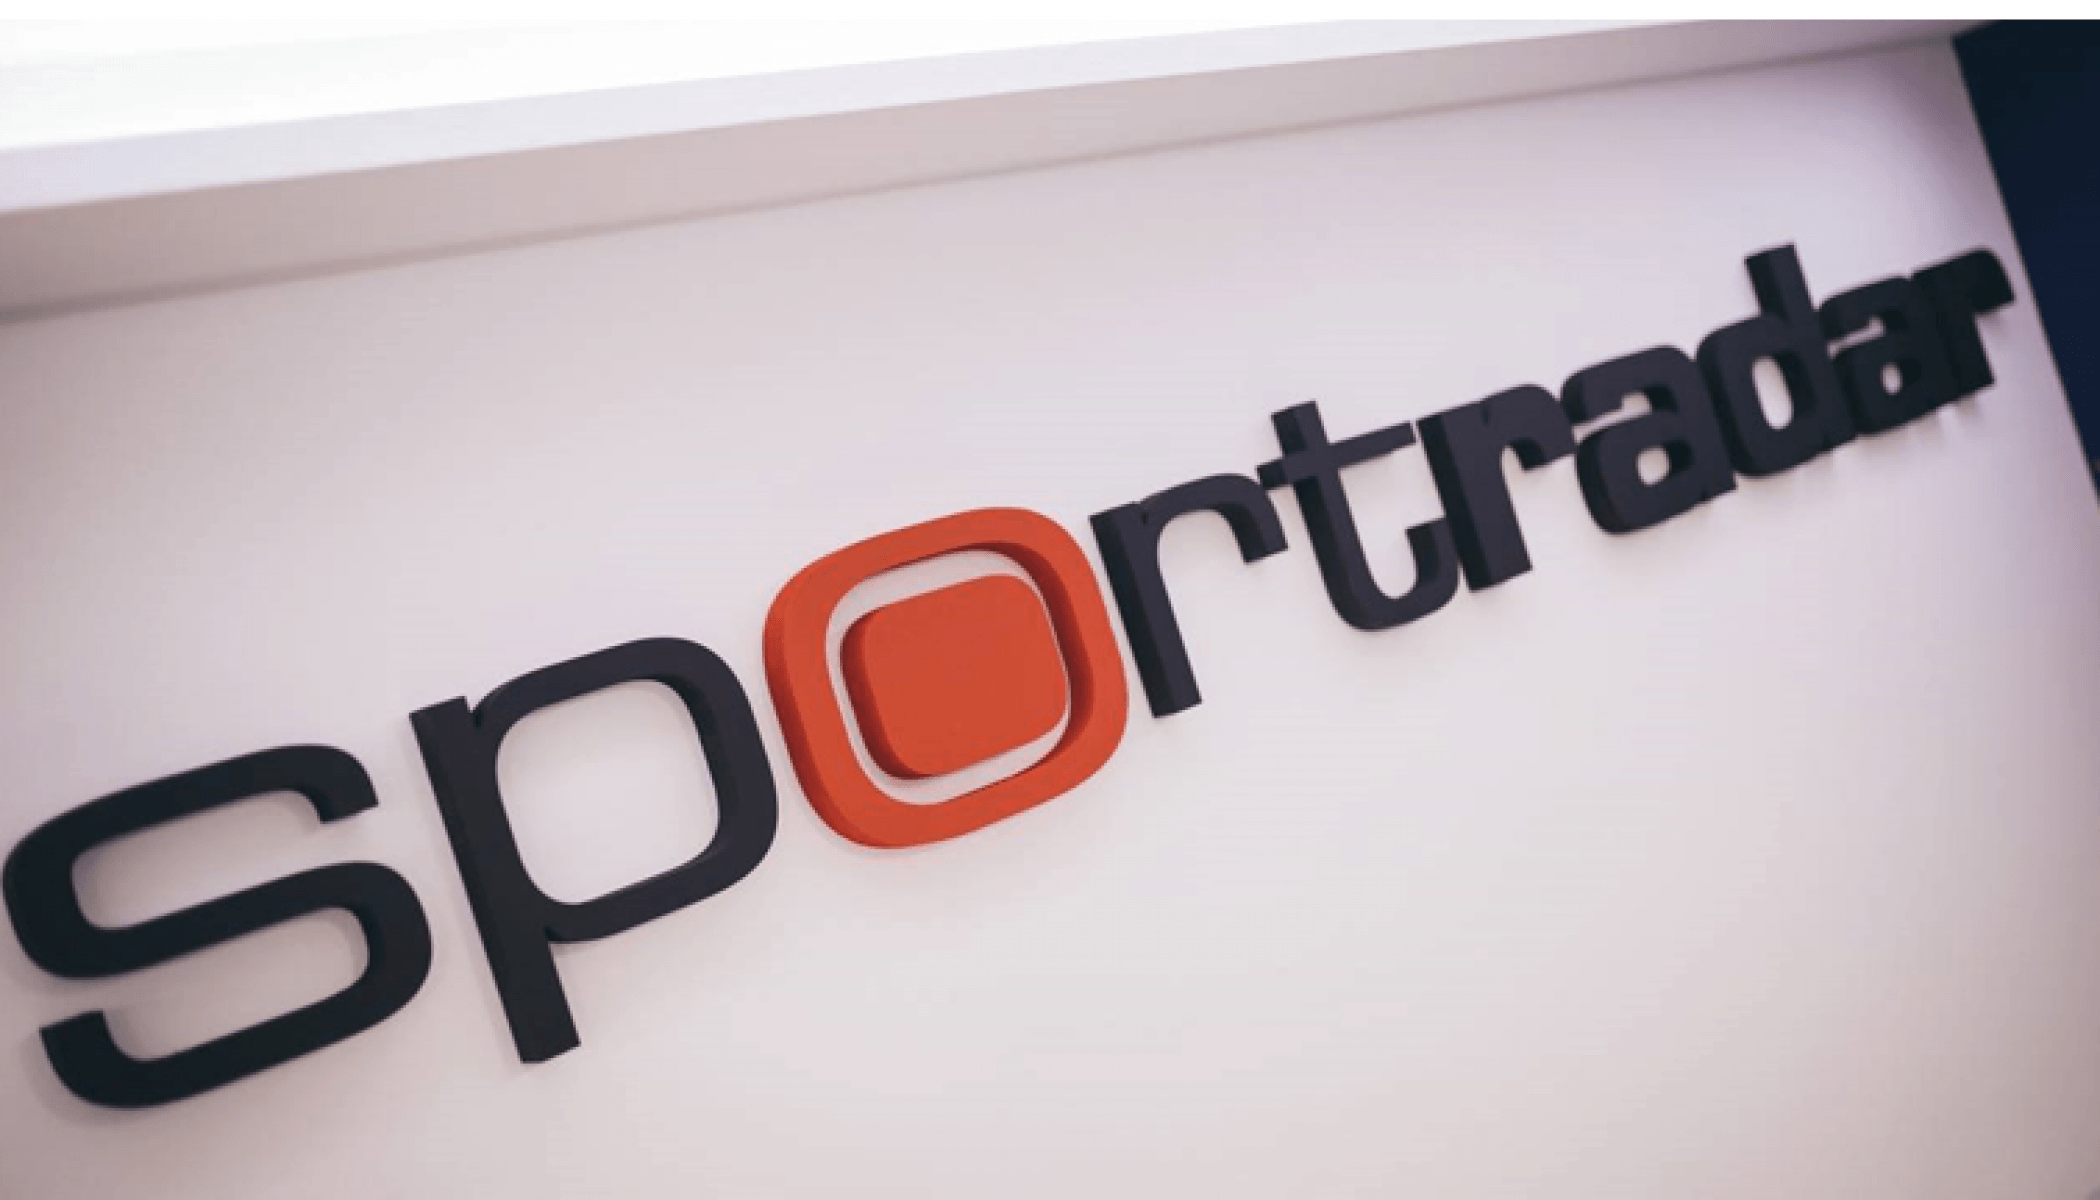 Sportradar adds new real-time deal contract